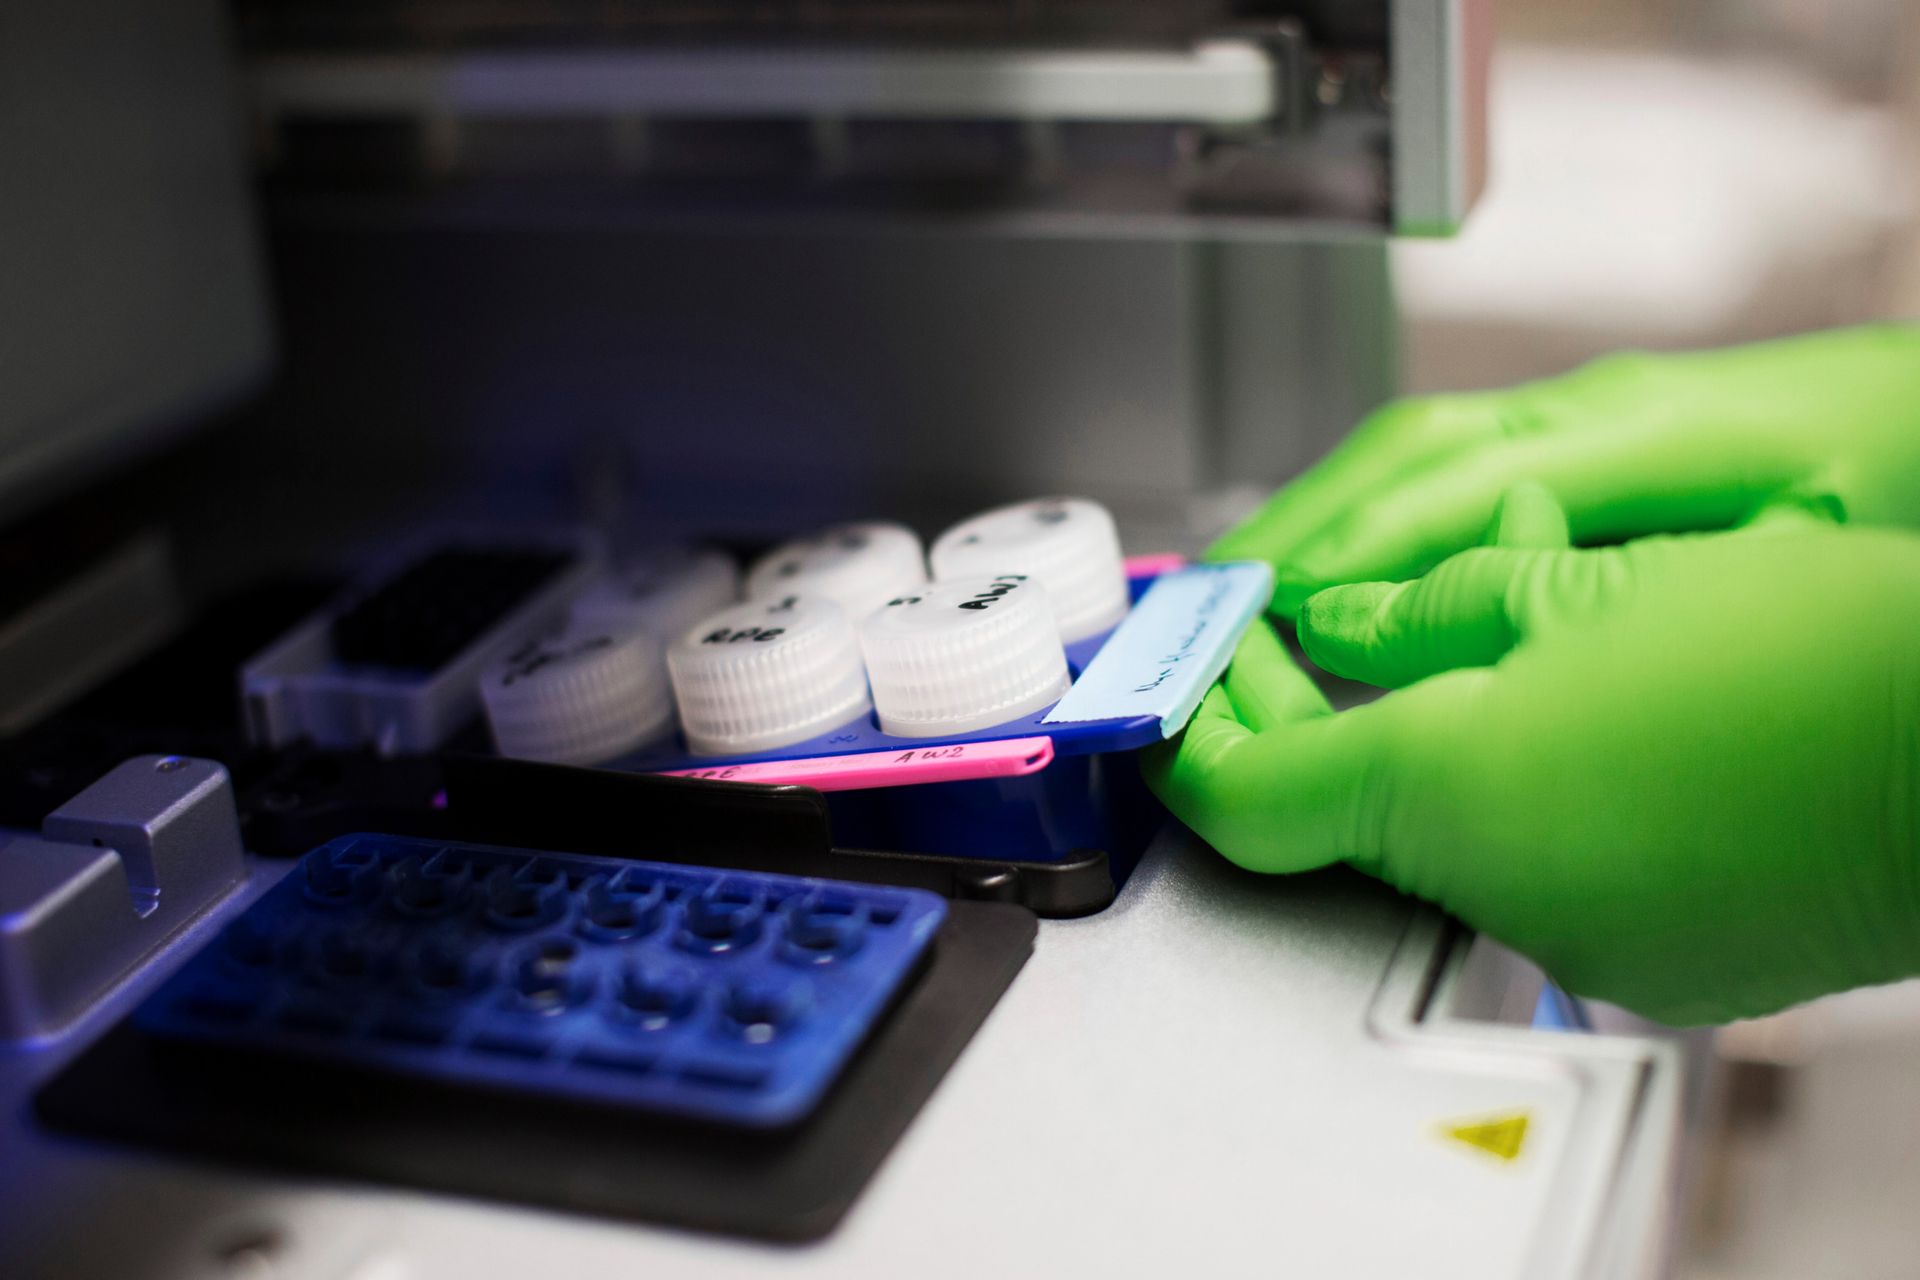 A close-up photo capturing a laboratory setting, where a person's hands, clad in bright green latex gloves, can be seen handling various laboratory items.